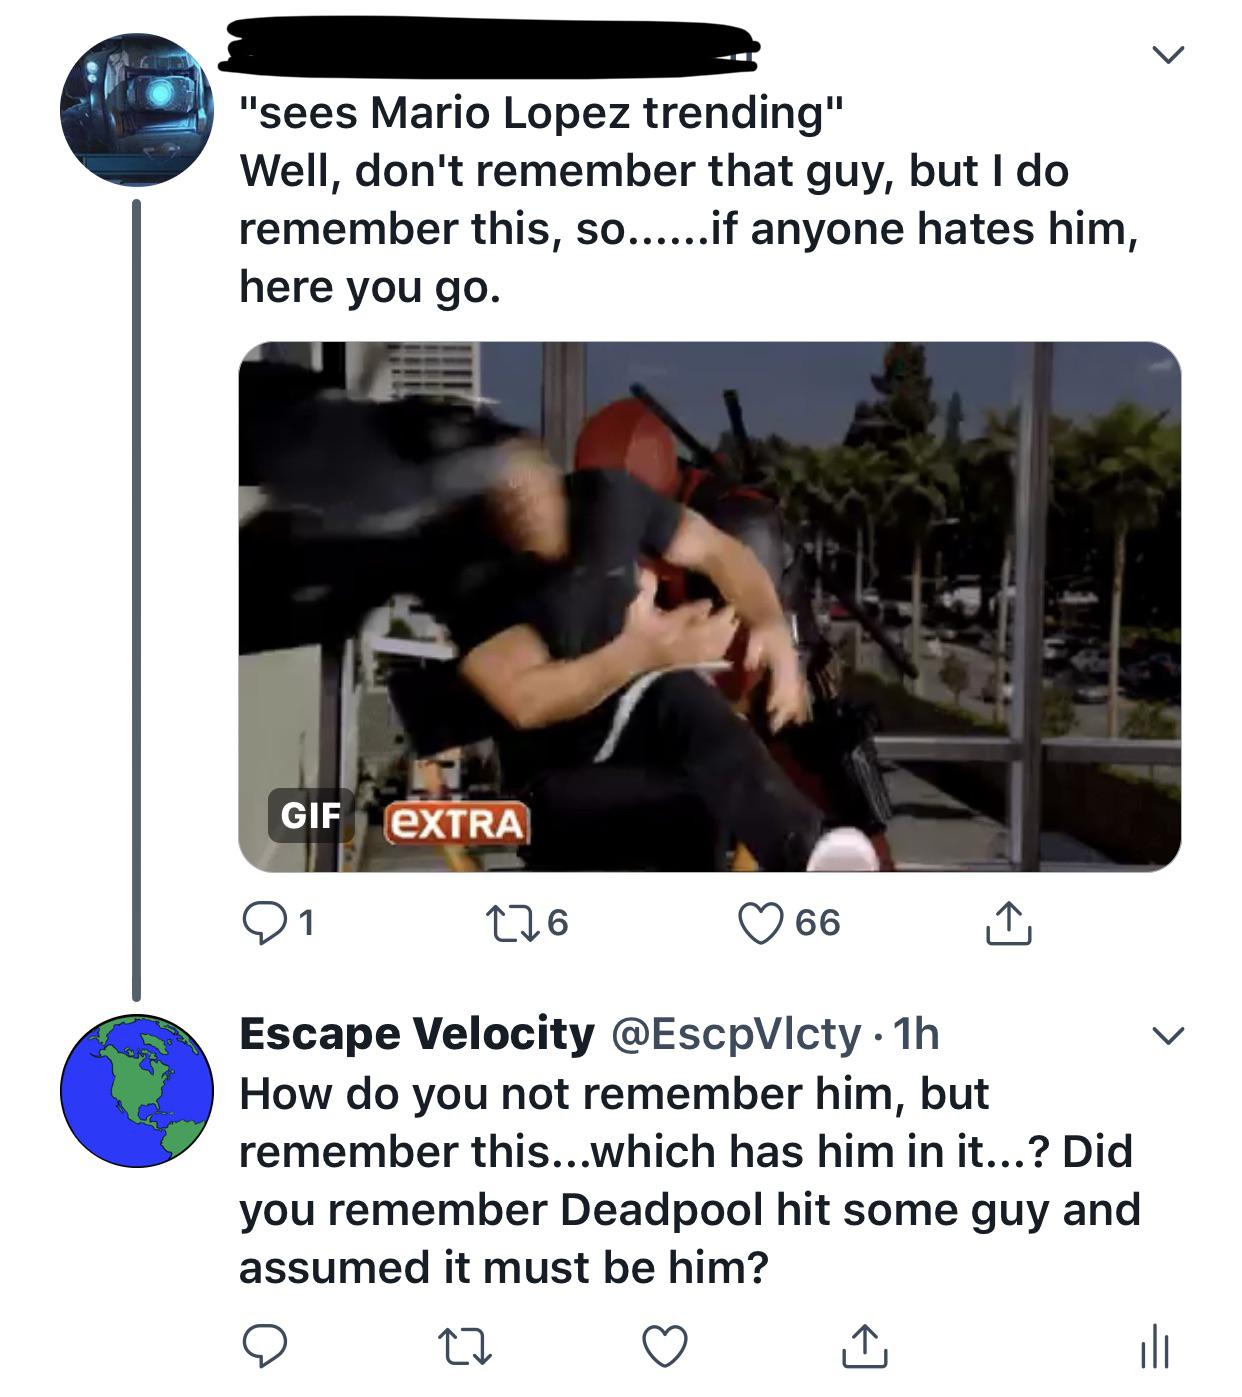 photo caption - "sees Mario Lopez trending" Well, don't remember that guy, but I do remember this, so...... if anyone hates him, here you go. Gif Extra 01 236 66 Escape Velocity 1h How do you not remember him, but remember this...which has him in it...? D